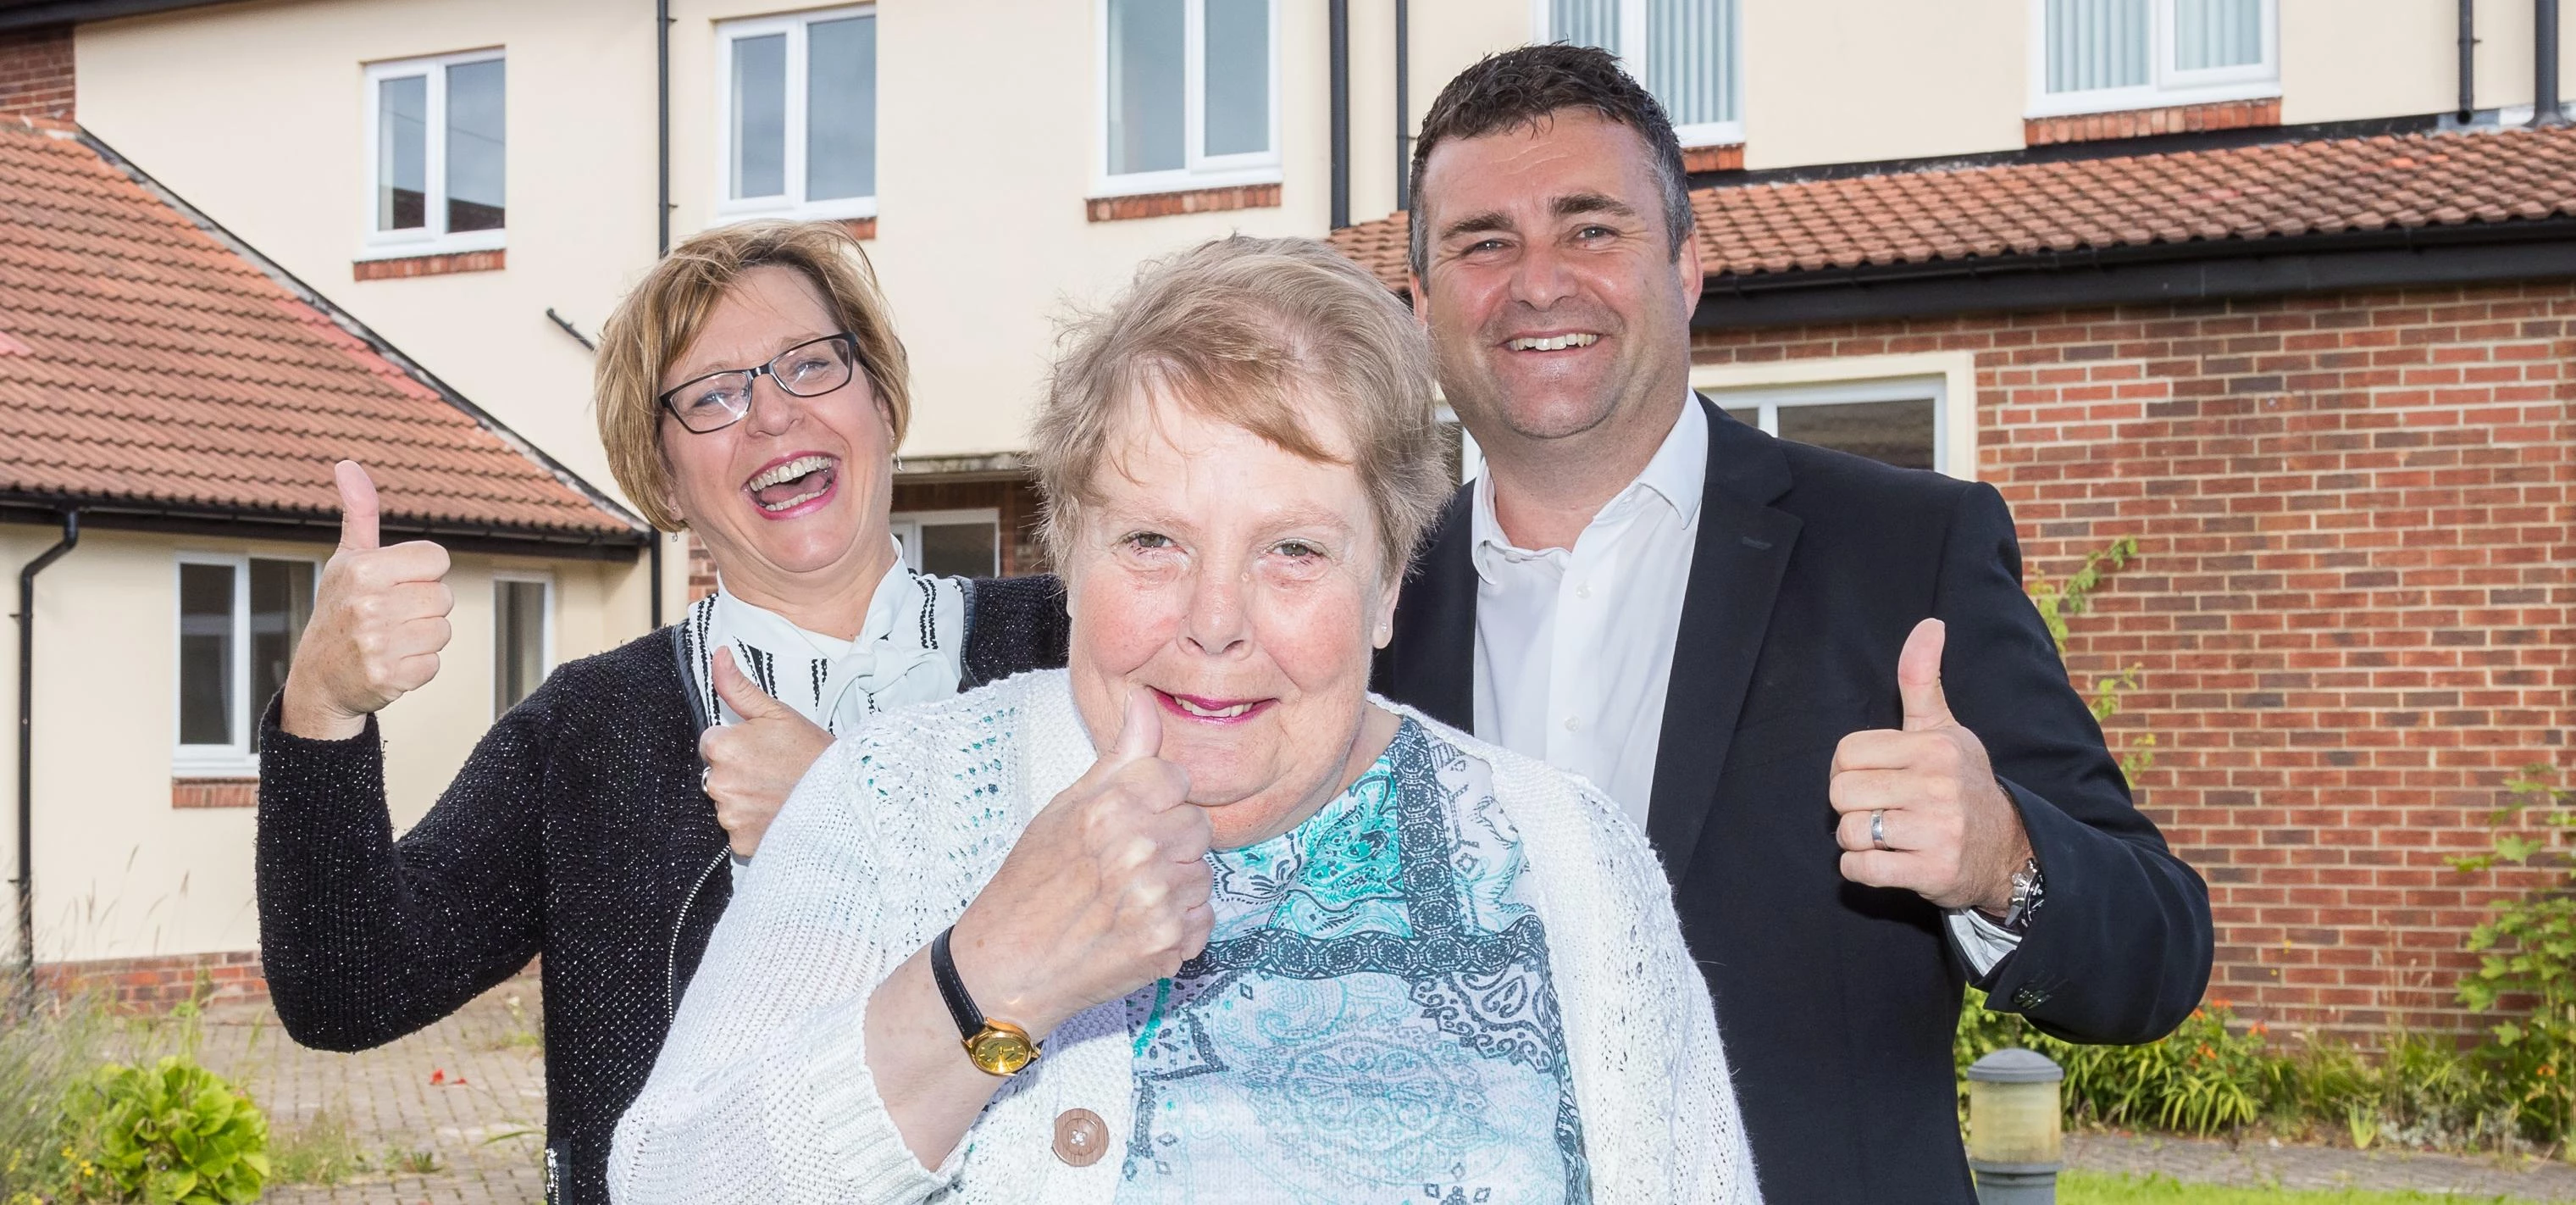 Thumbs up! Local resident Joan Smith (centre) with Mandy English-Jones and Keith McDougall.